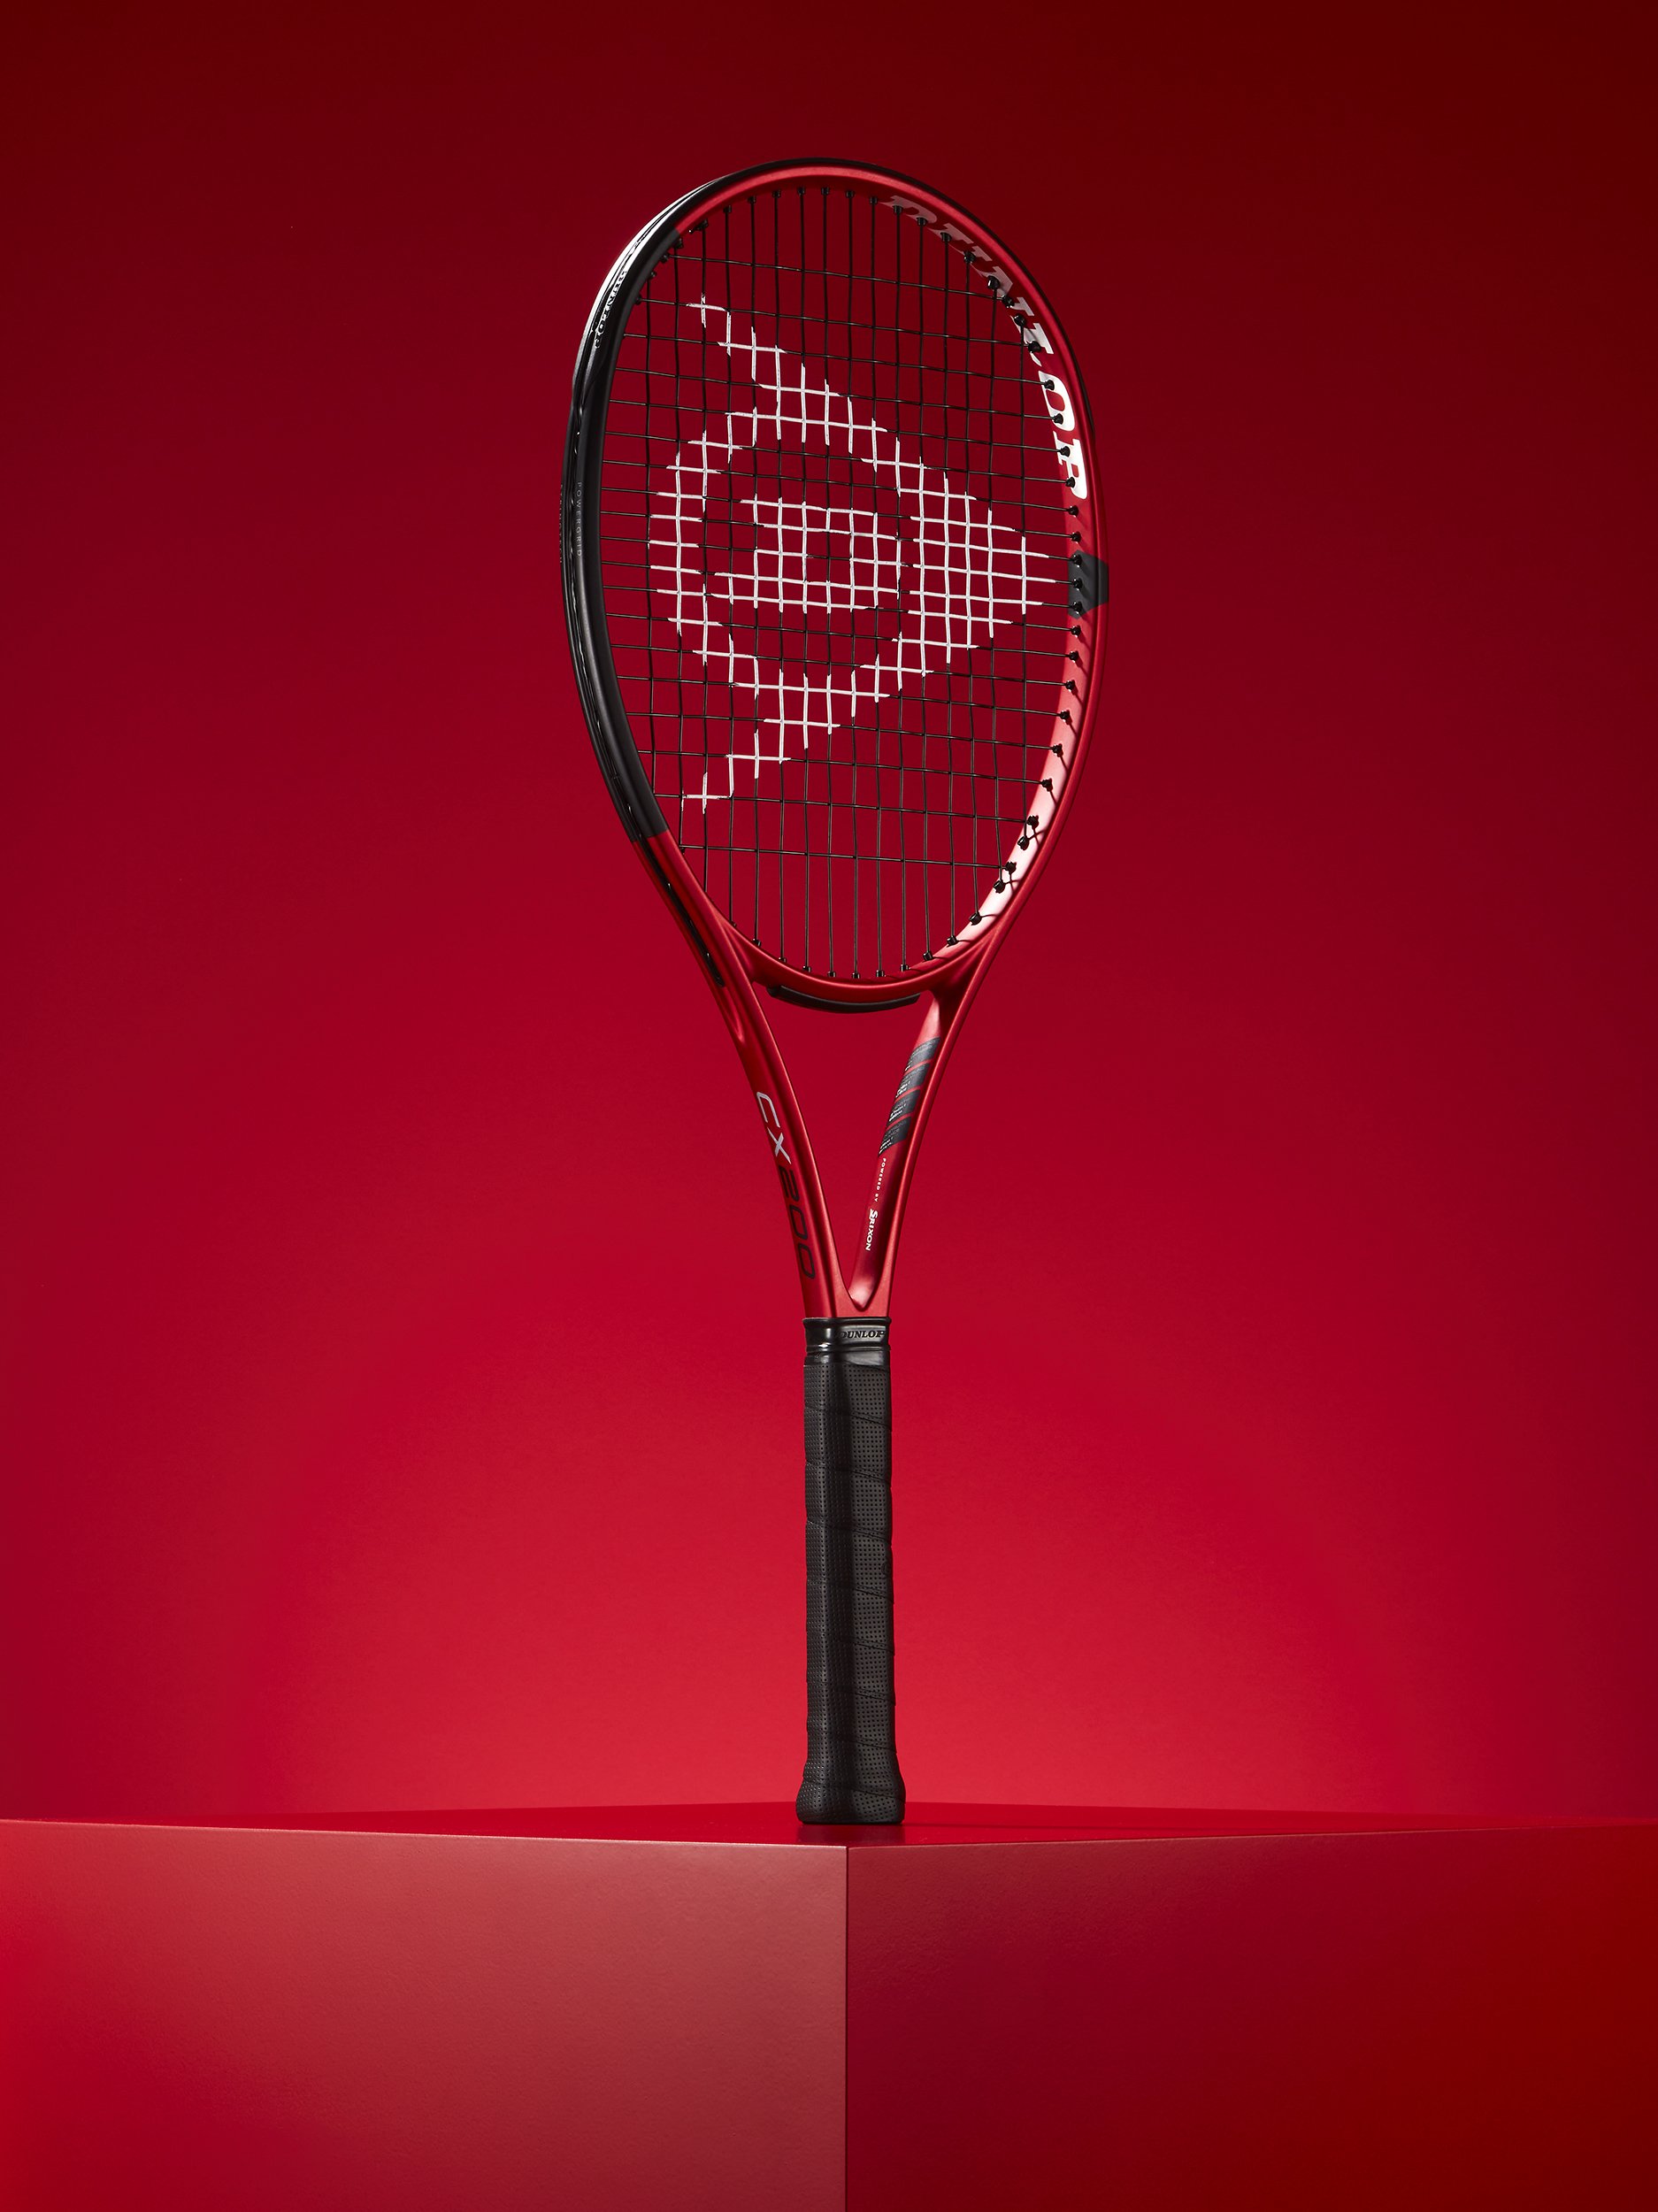 Dunlop CX Tennis Racket - Advertising photography by Simon Lyle Photography